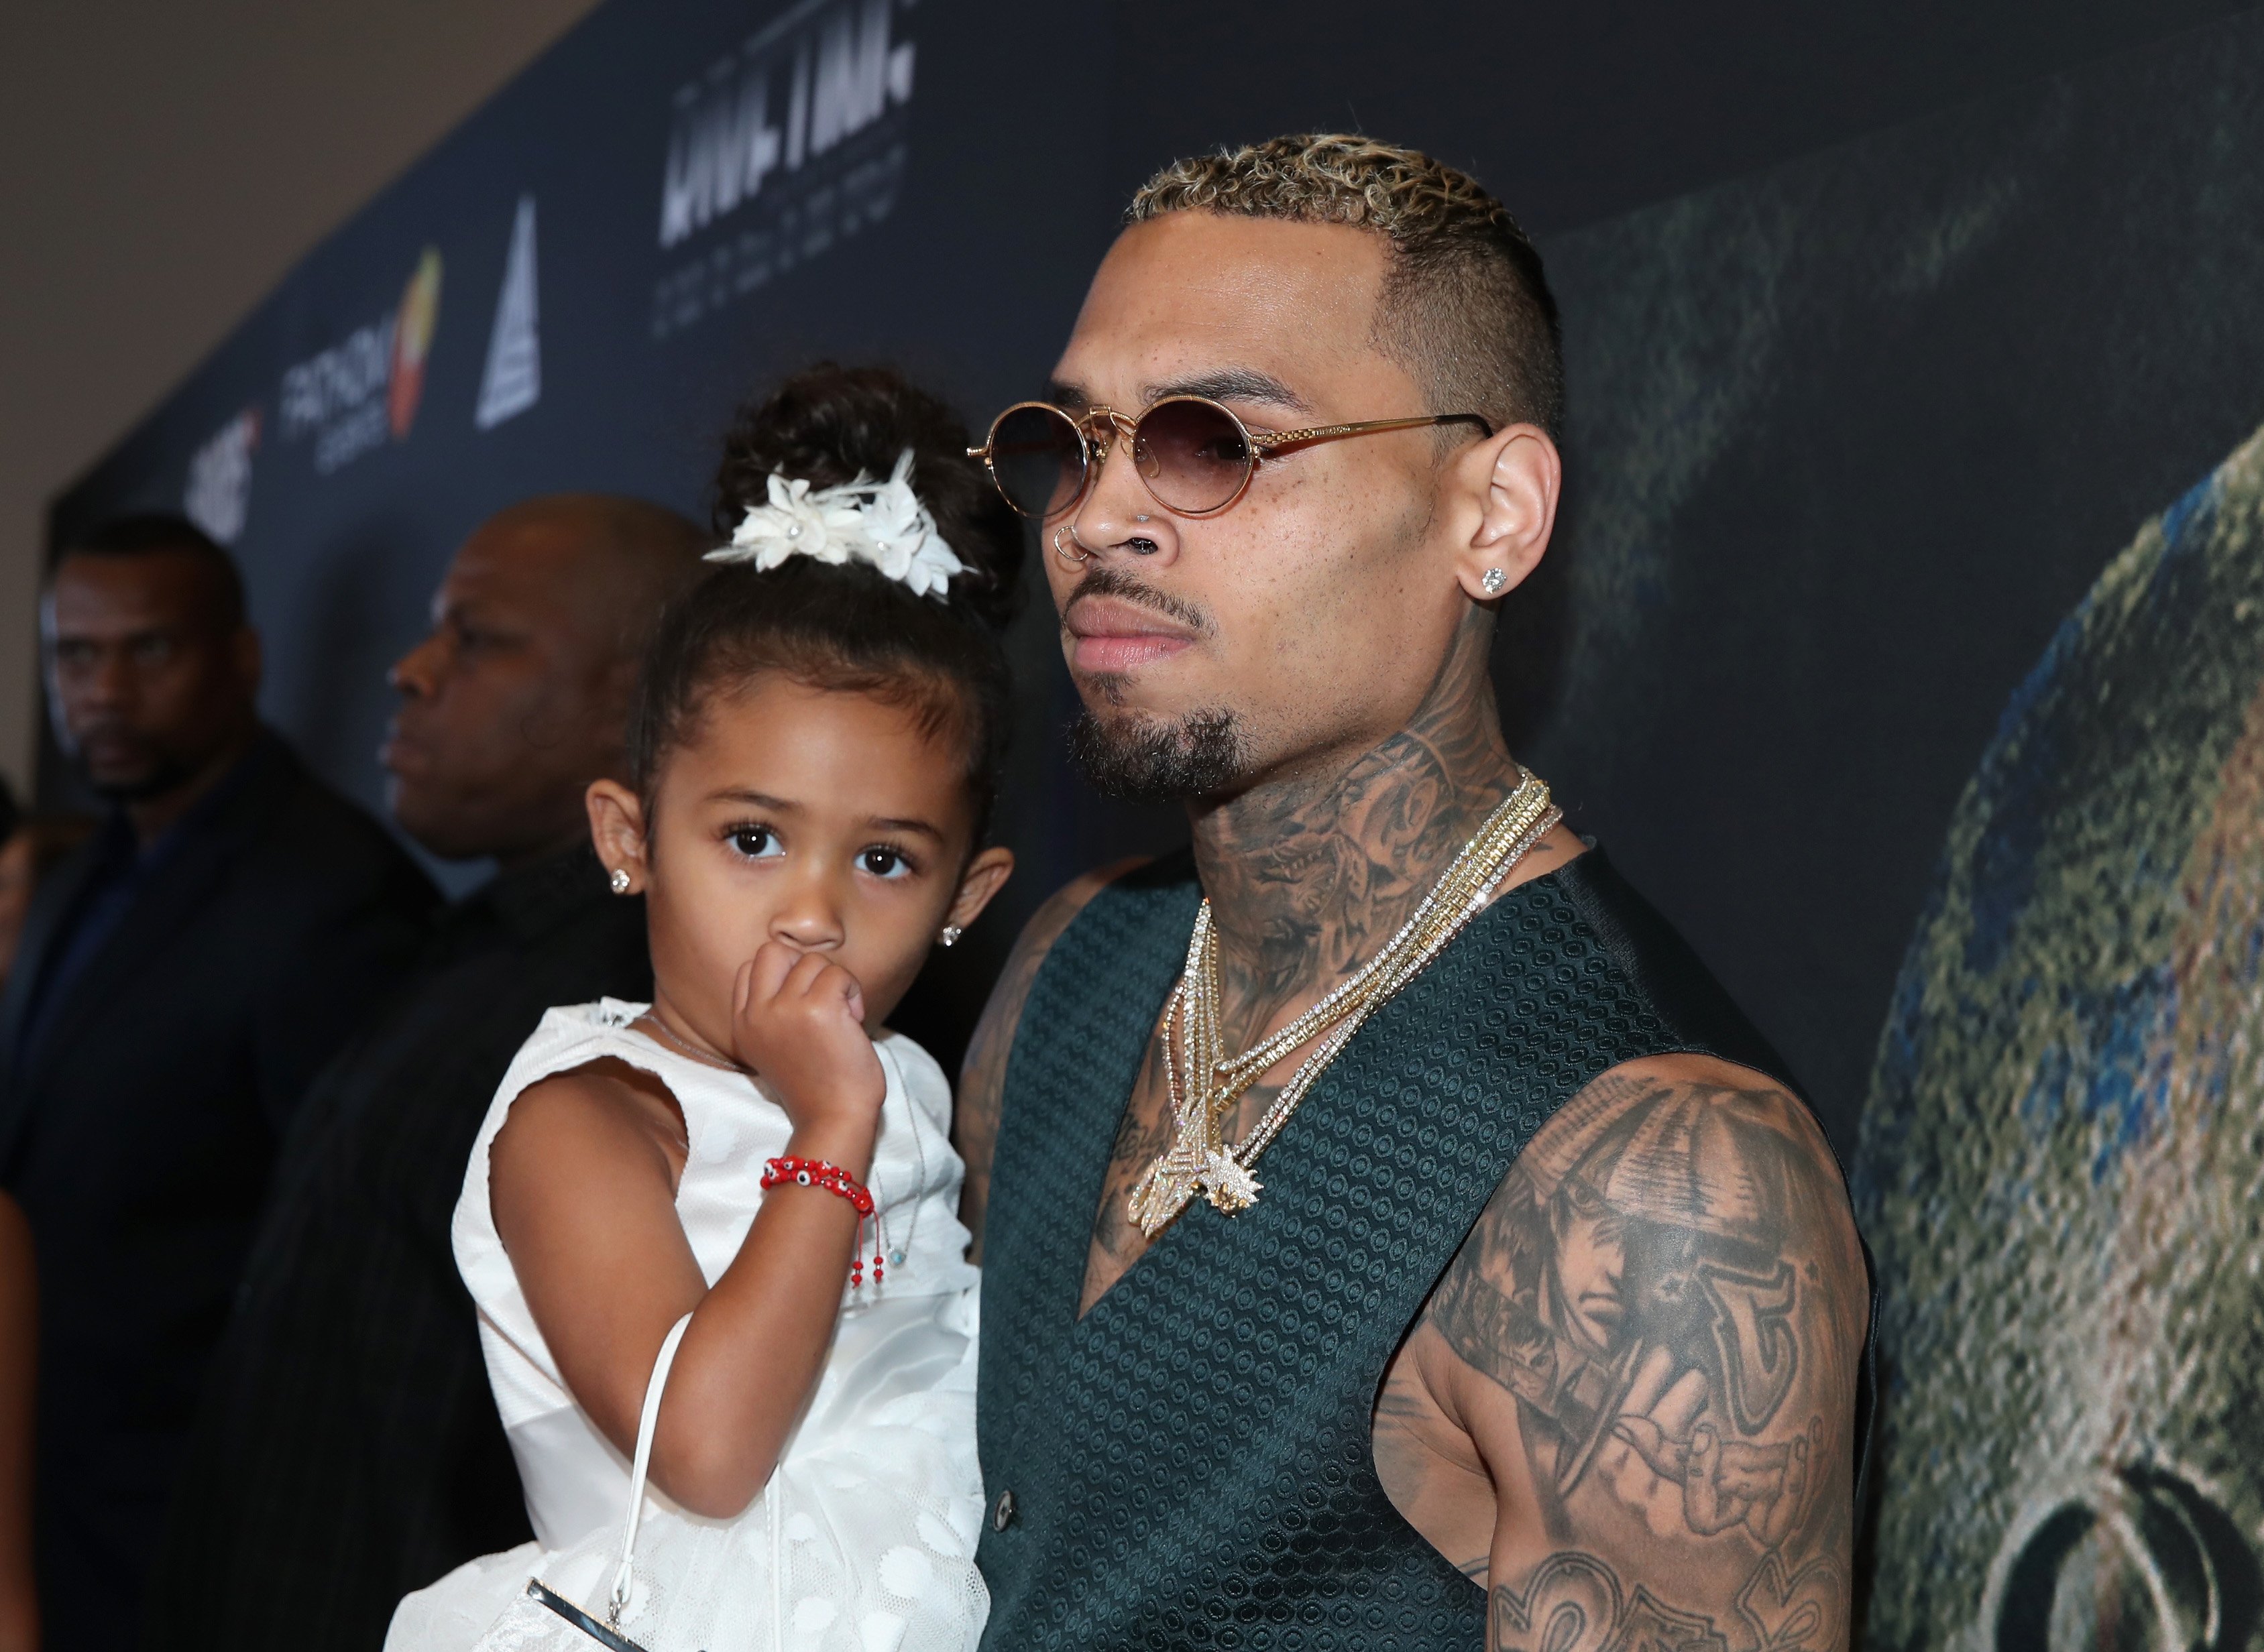 Chris Brown and Royalty Brown at the premiere of "Chris Brown: Welcome To My Life" at L.A. LIVE on June 6, 2017 | Photo: Getty Images